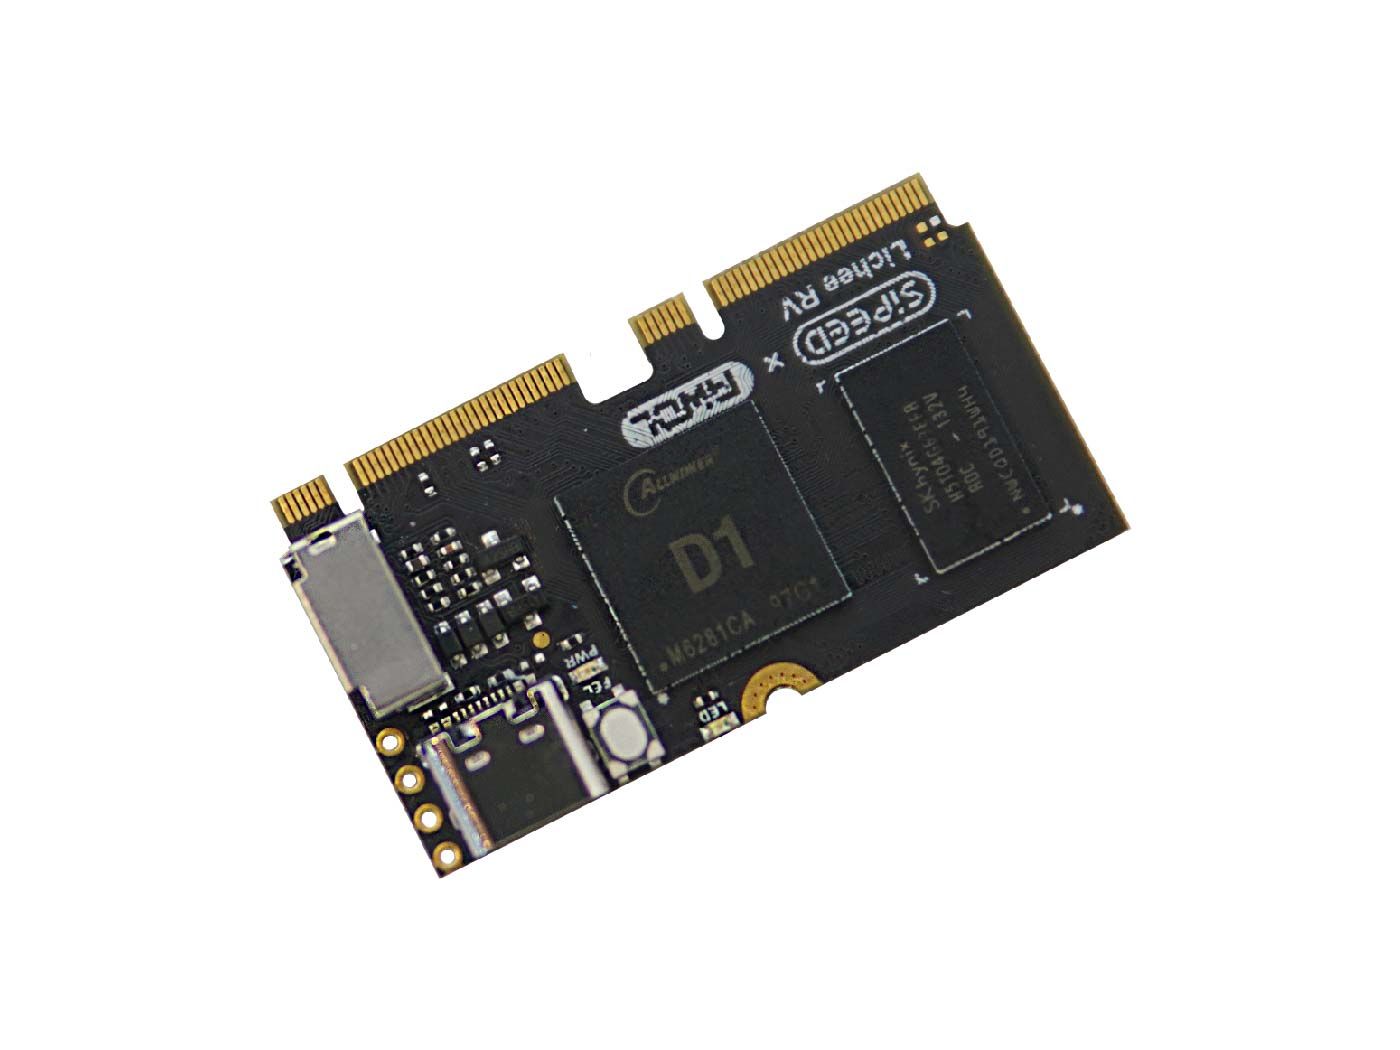 lichee RV-Nezha CM Allwinner D1 SoC with 1.14 Inch SPI LCD - Supported Linux